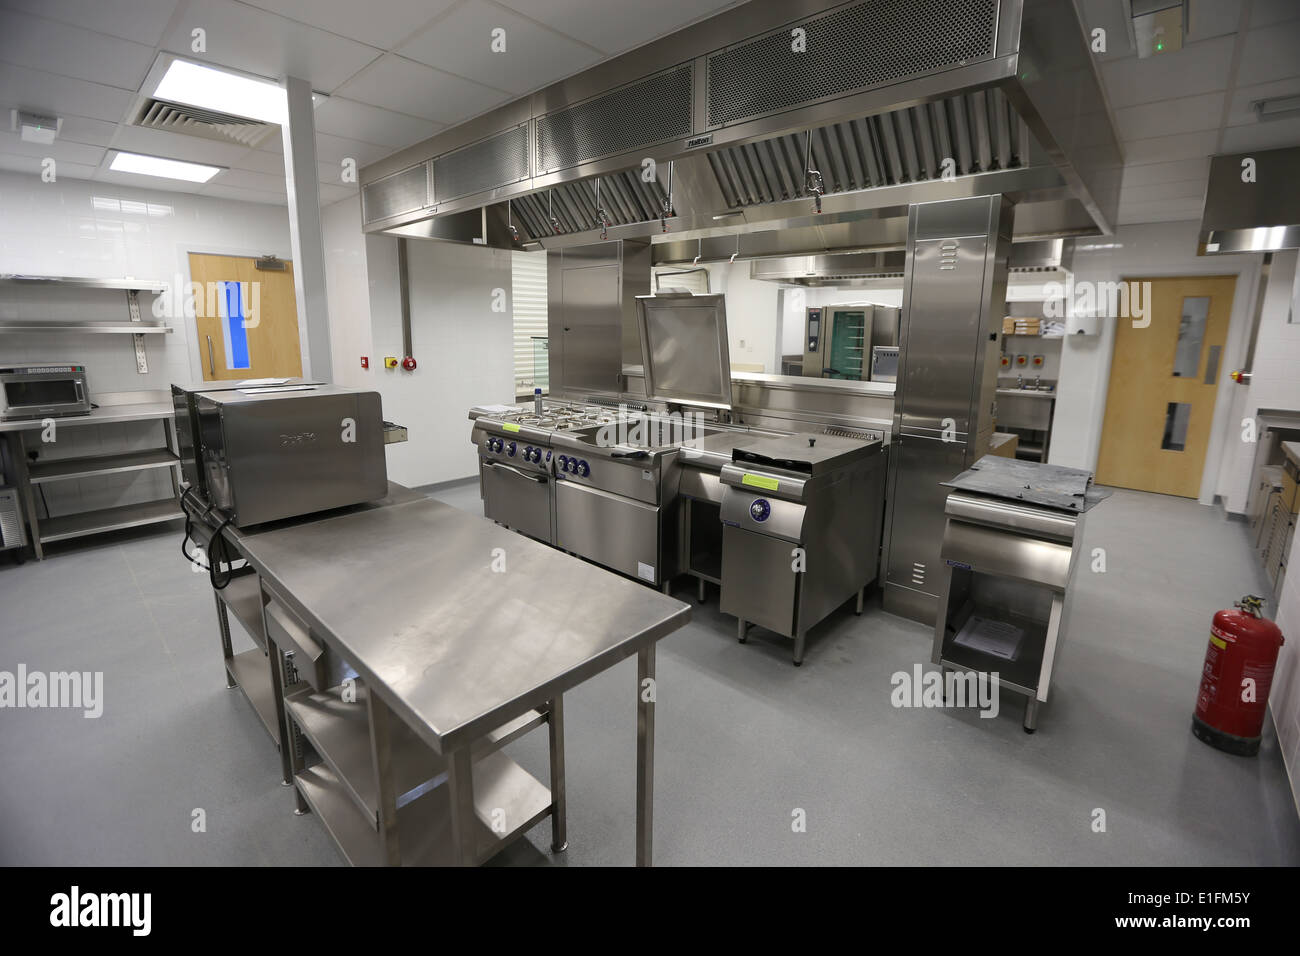 a newly fitted kitchen in a restaurant canteen Stock Photo